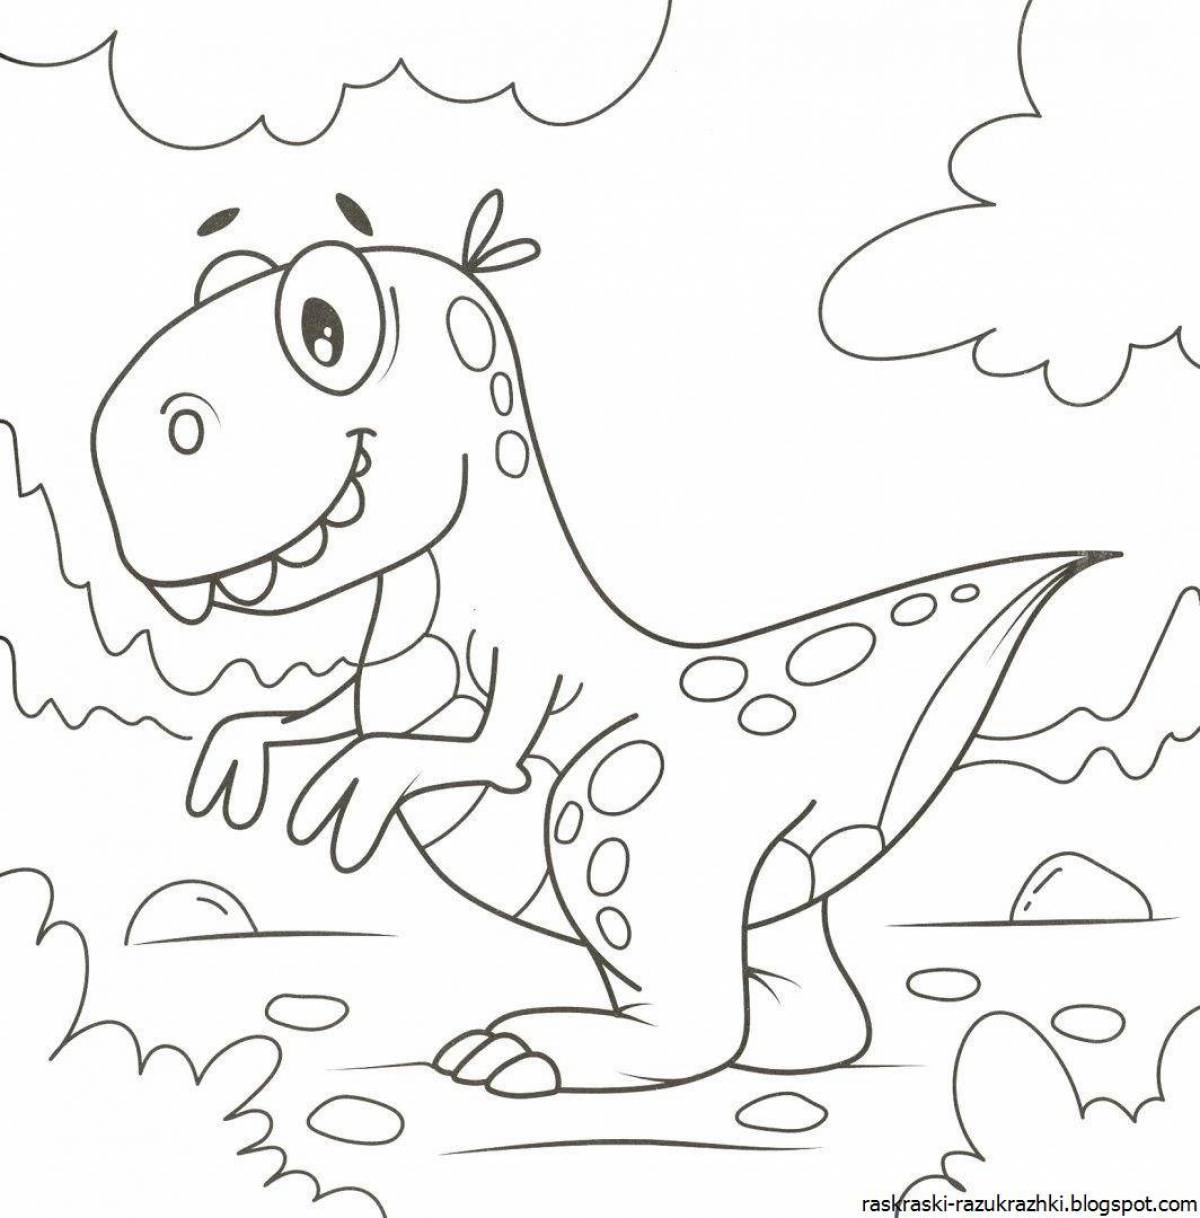 Wonderful dinosaurs coloring book for kids 5-6 years old